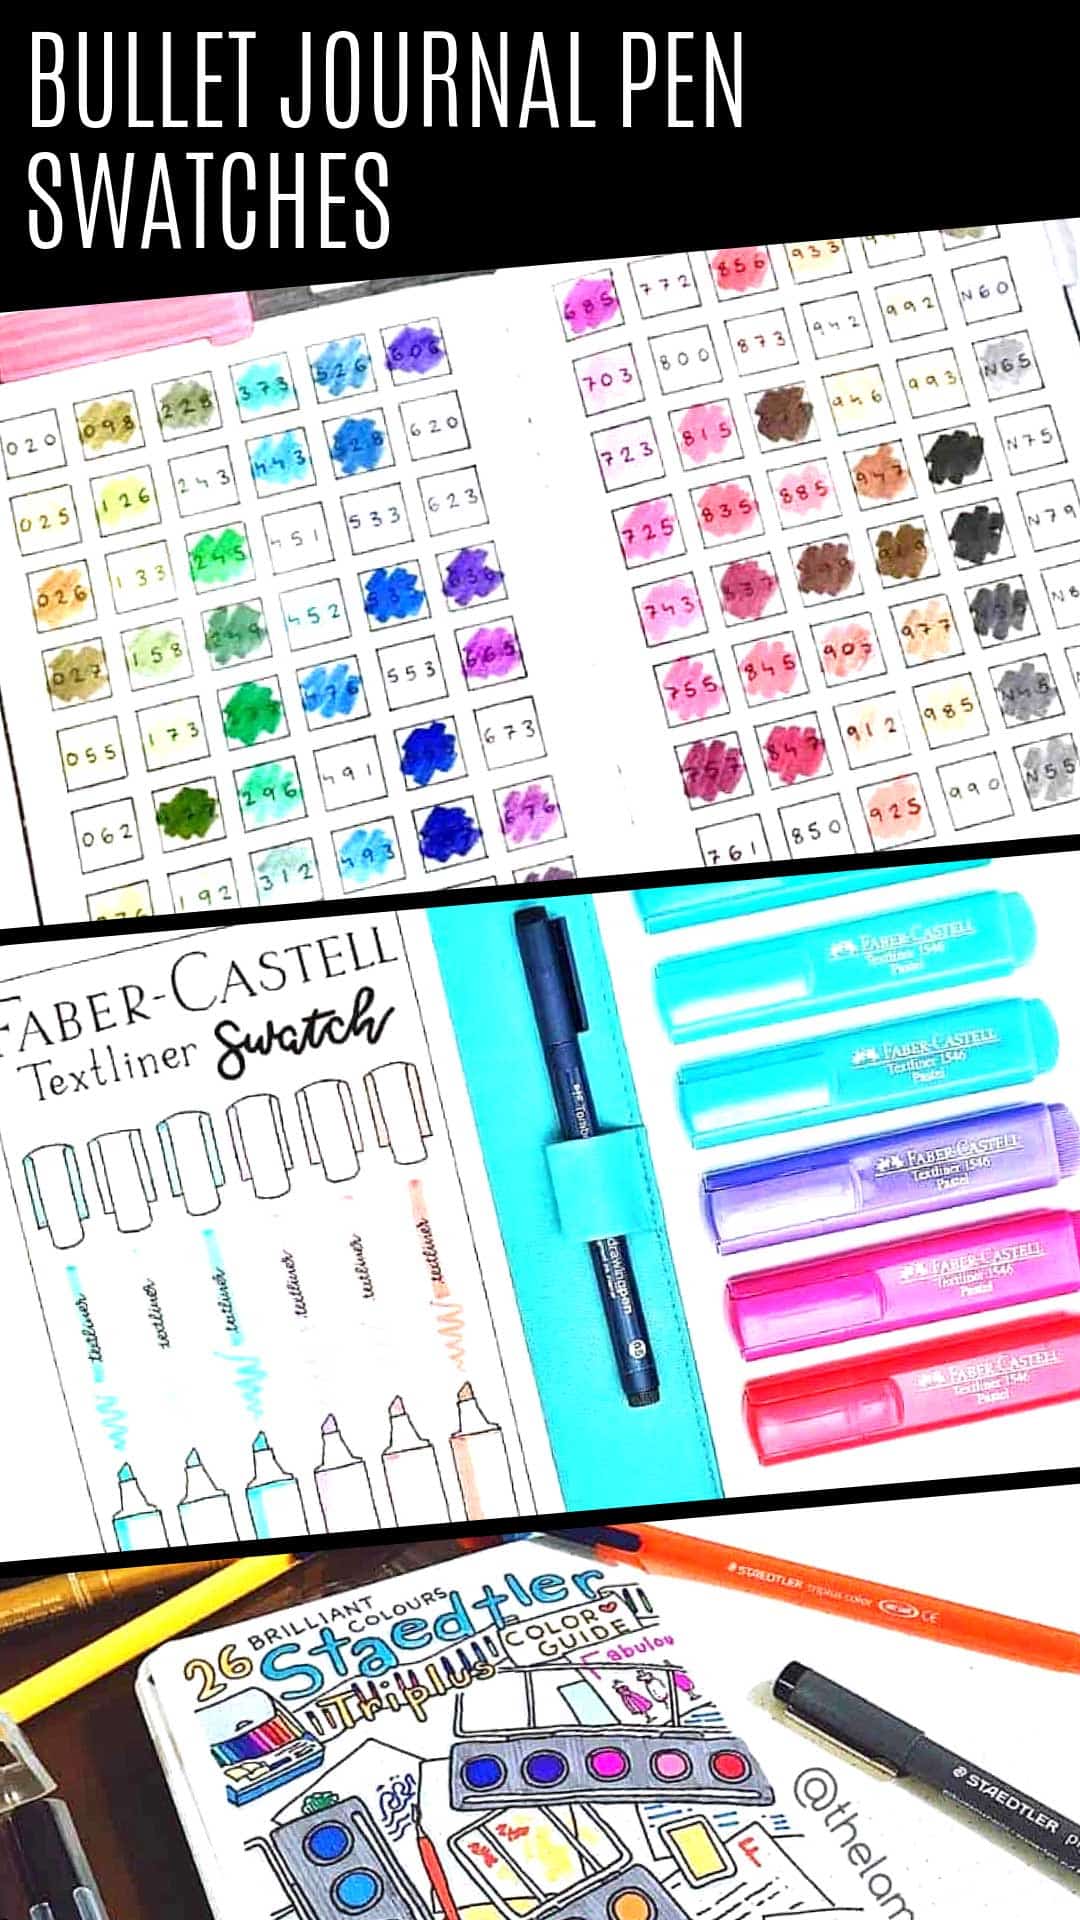 Bullet Journal Pen Test Spreads You’ll Want to Try for Yourself!